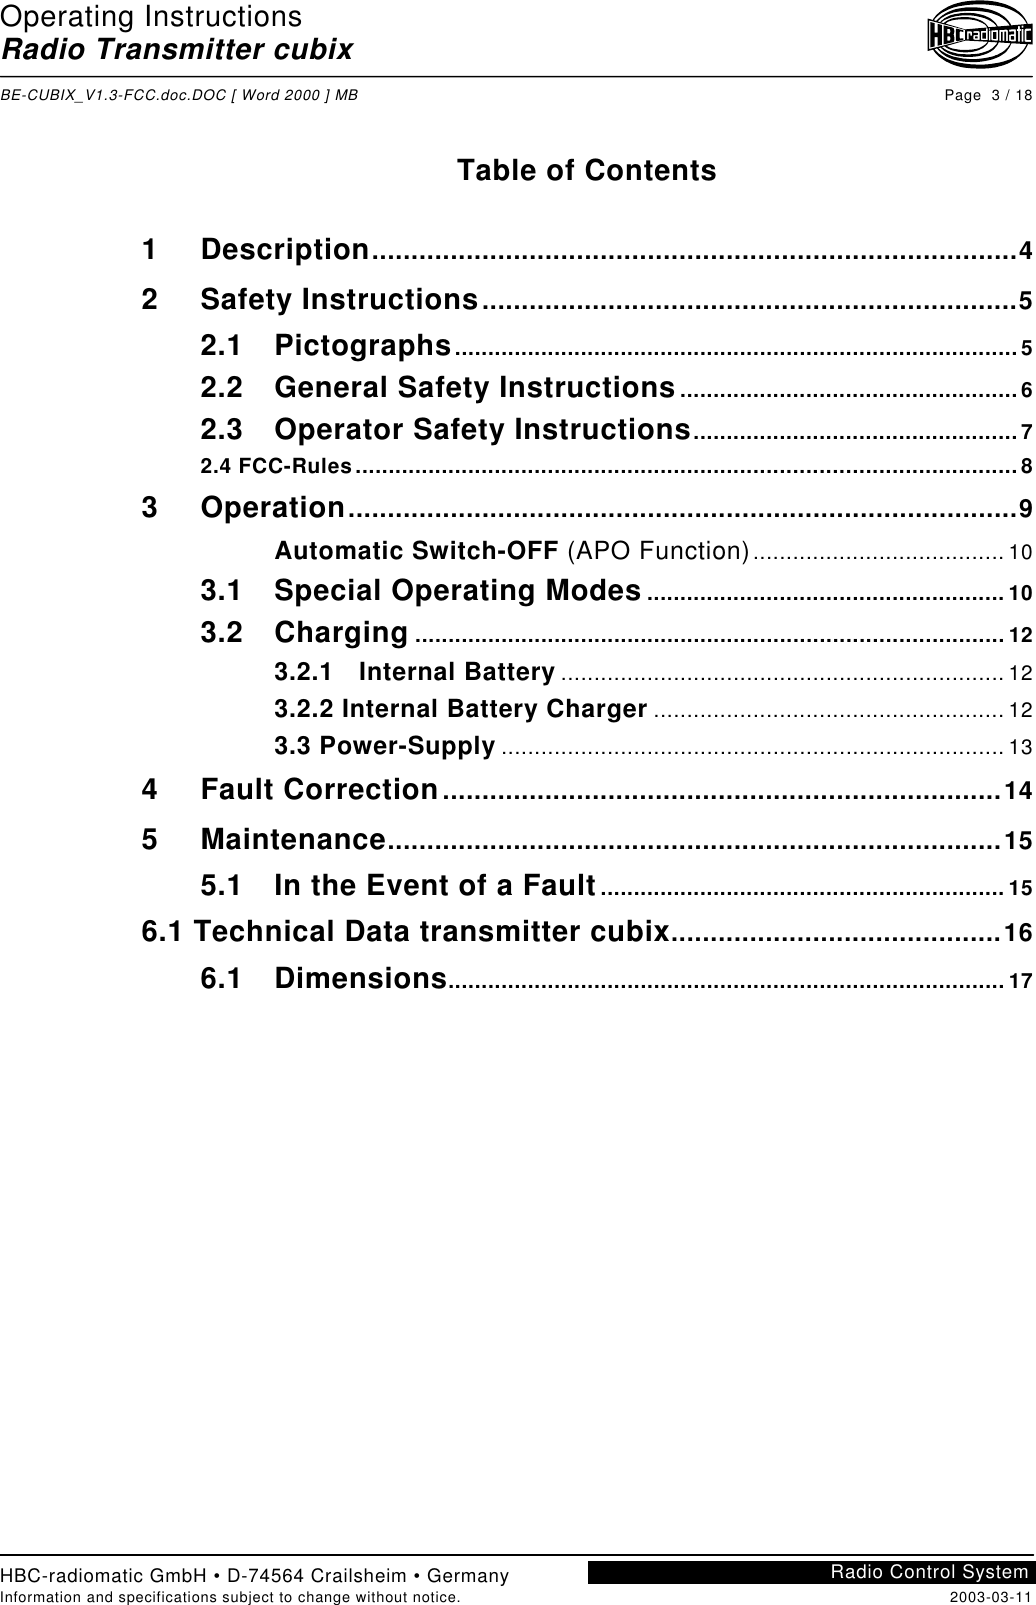 Operating InstructionsRadio Transmitter cubixBE-CUBIX_V1.3-FCC.doc.DOC [ Word 2000 ] MB Page  3 / 18HBC-radiomatic GmbH • D-74564 Crailsheim • GermanyInformation and specifications subject to change without notice. 2003-03-11Radio Control SystemTable of Contents1 Description..................................................................................42 Safety Instructions....................................................................52.1 Pictographs.....................................................................................52.2 General Safety Instructions...................................................62.3 Operator Safety Instructions.................................................72.4 FCC-Rules....................................................................................................83 Operation.....................................................................................9Automatic Switch-OFF (APO Function)...................................... 103.1 Special Operating Modes ...................................................... 103.2 Charging ......................................................................................... 123.2.1 Internal Battery ................................................................... 123.2.2 Internal Battery Charger ..................................................... 123.3 Power-Supply ............................................................................ 134 Fault Correction.......................................................................145 Maintenance..............................................................................155.1 In the Event of a Fault............................................................. 156.1 Technical Data transmitter cubix..........................................166.1 Dimensions.................................................................................... 17